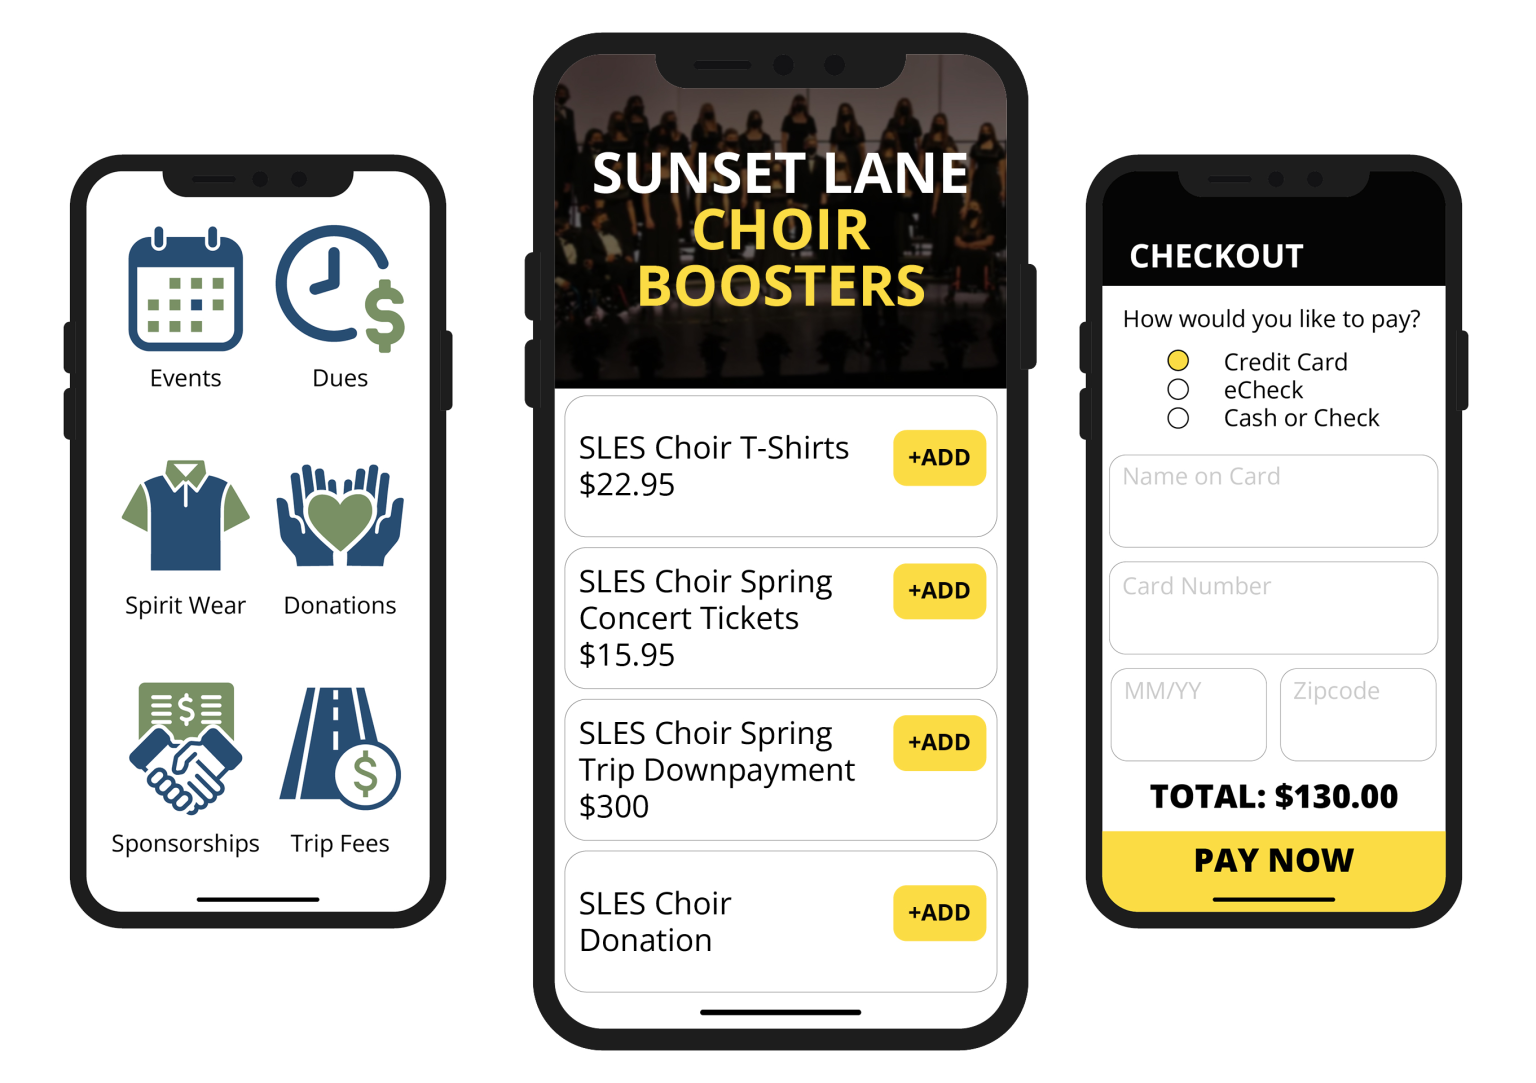 ONLINE STORE | Make group and nonprofit payment collection easier with your own secure, PCI Compliant online store. Sell tickets, spiritwear, collect donations and more. Works with Paypal, Stripe, Square, Venmo, Credit Cards, eChecks and Bank Accounts.